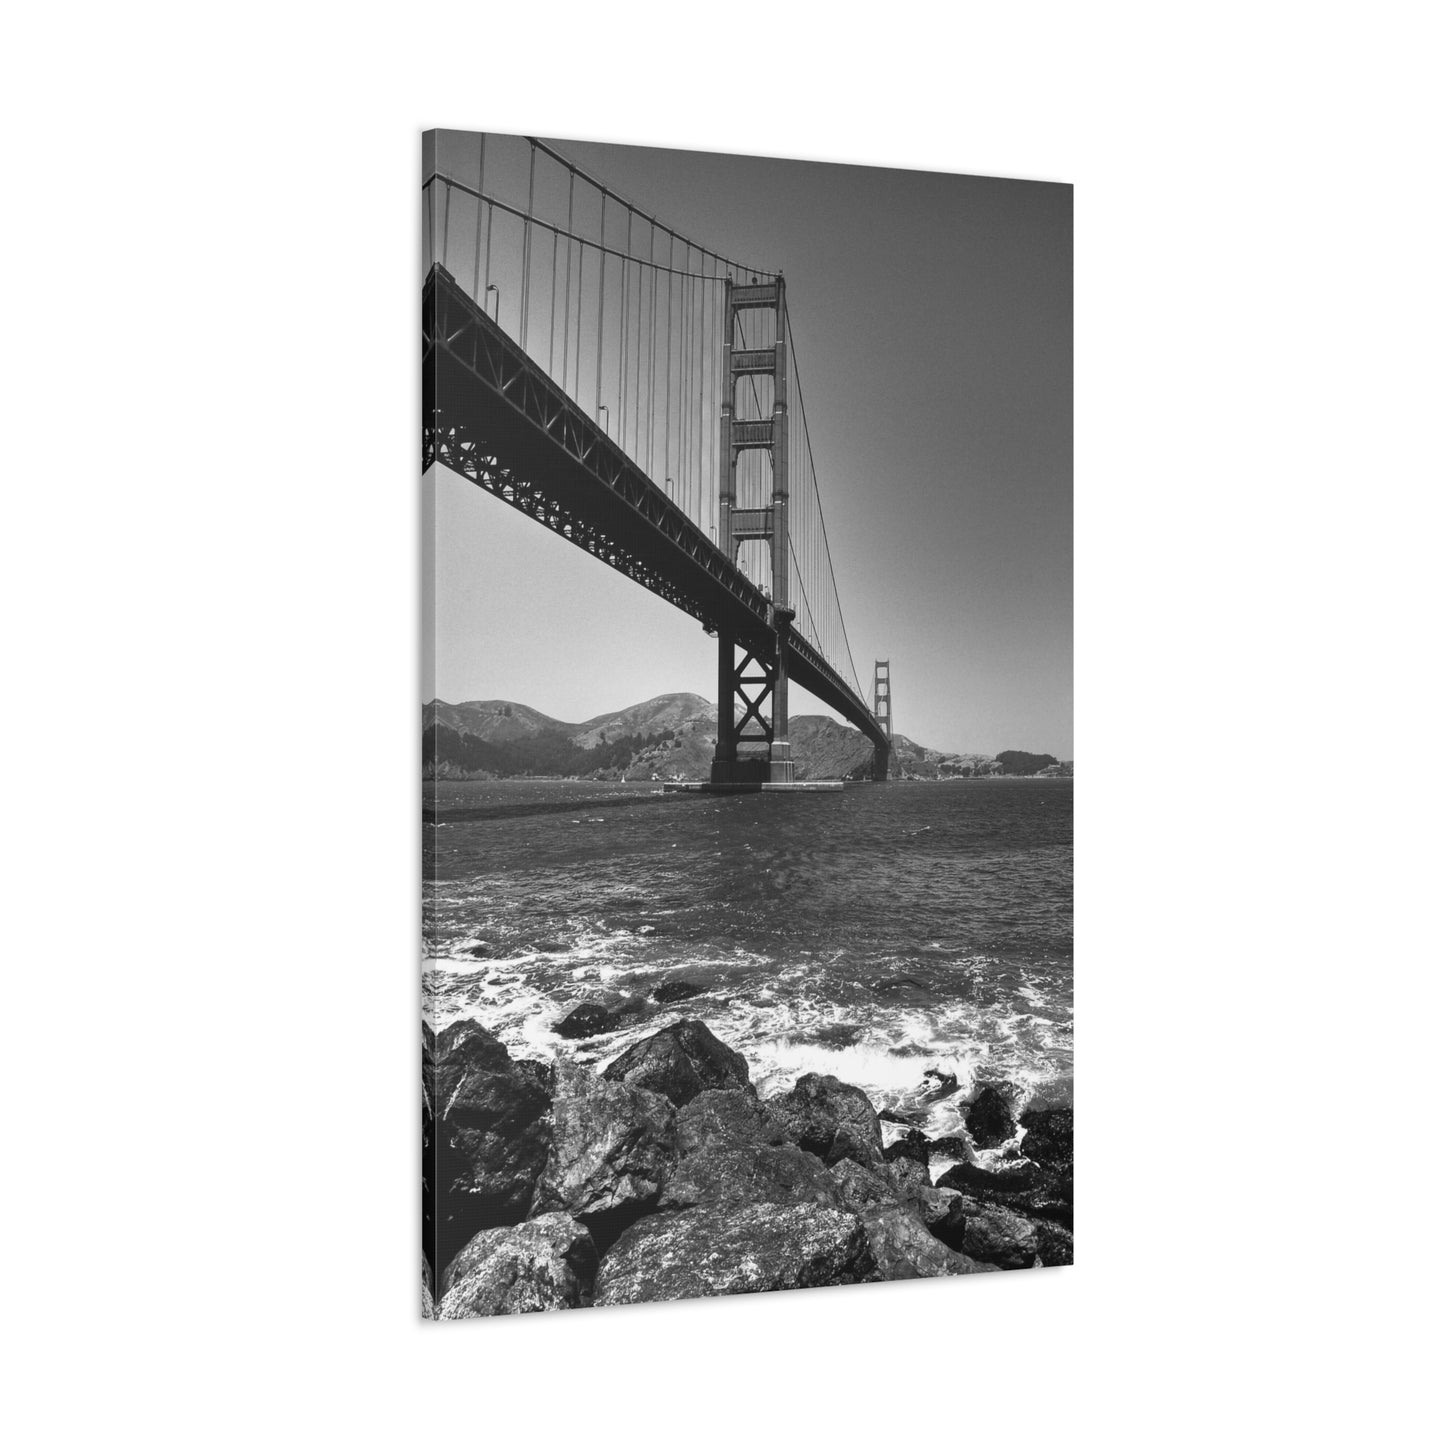 Canvas Print Of The Golden Gate Bridge In San Francisco In  Black & White For Wall Art